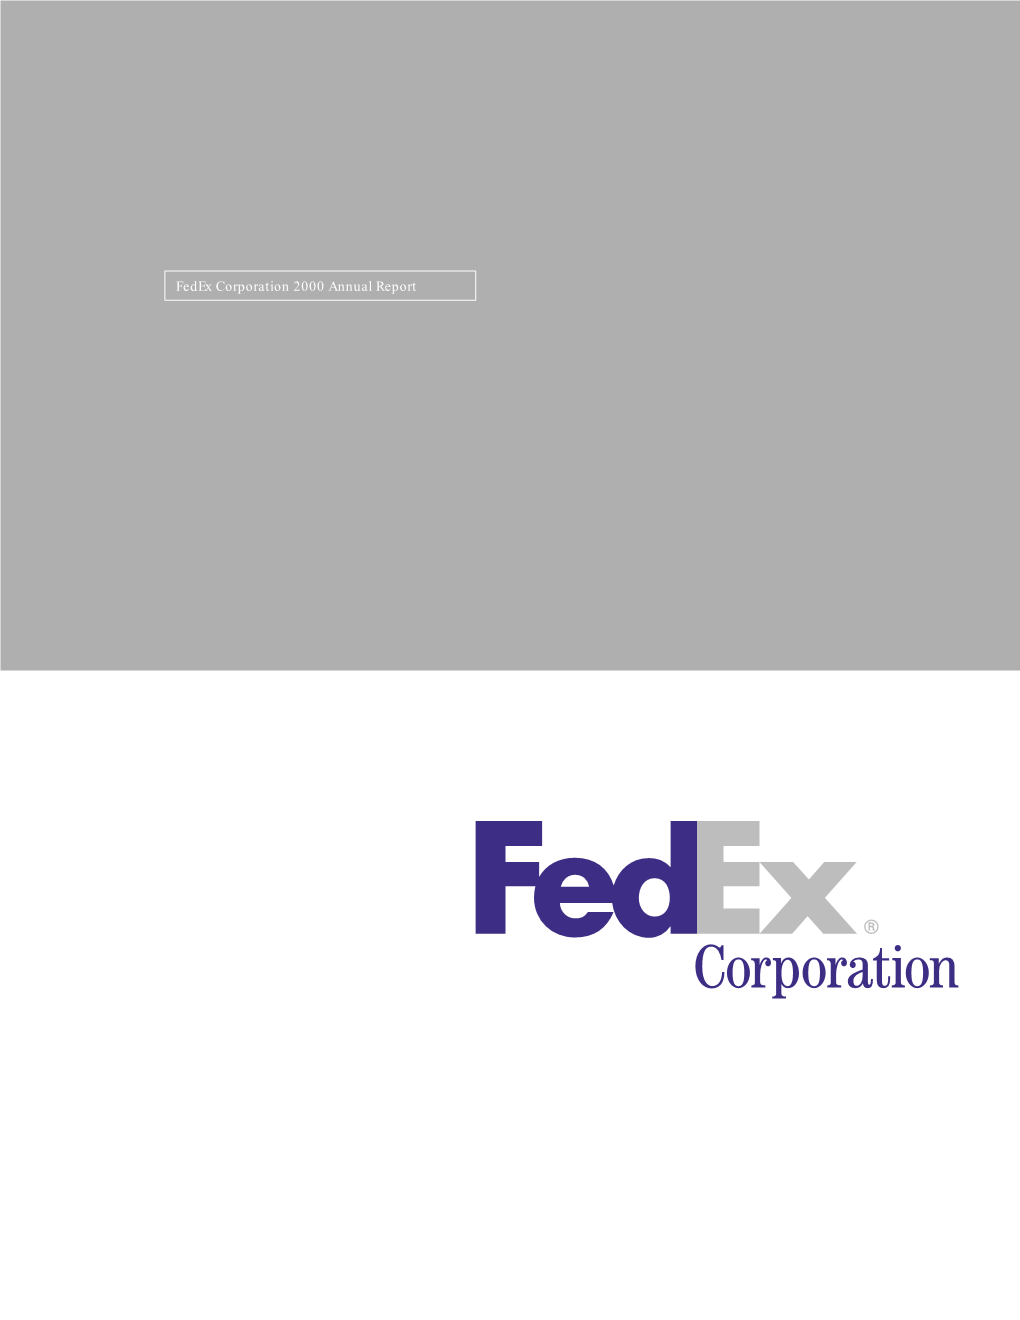 Fedex Corporation 2000 Annual Report Time-Deﬁnite, Global Express Transportation